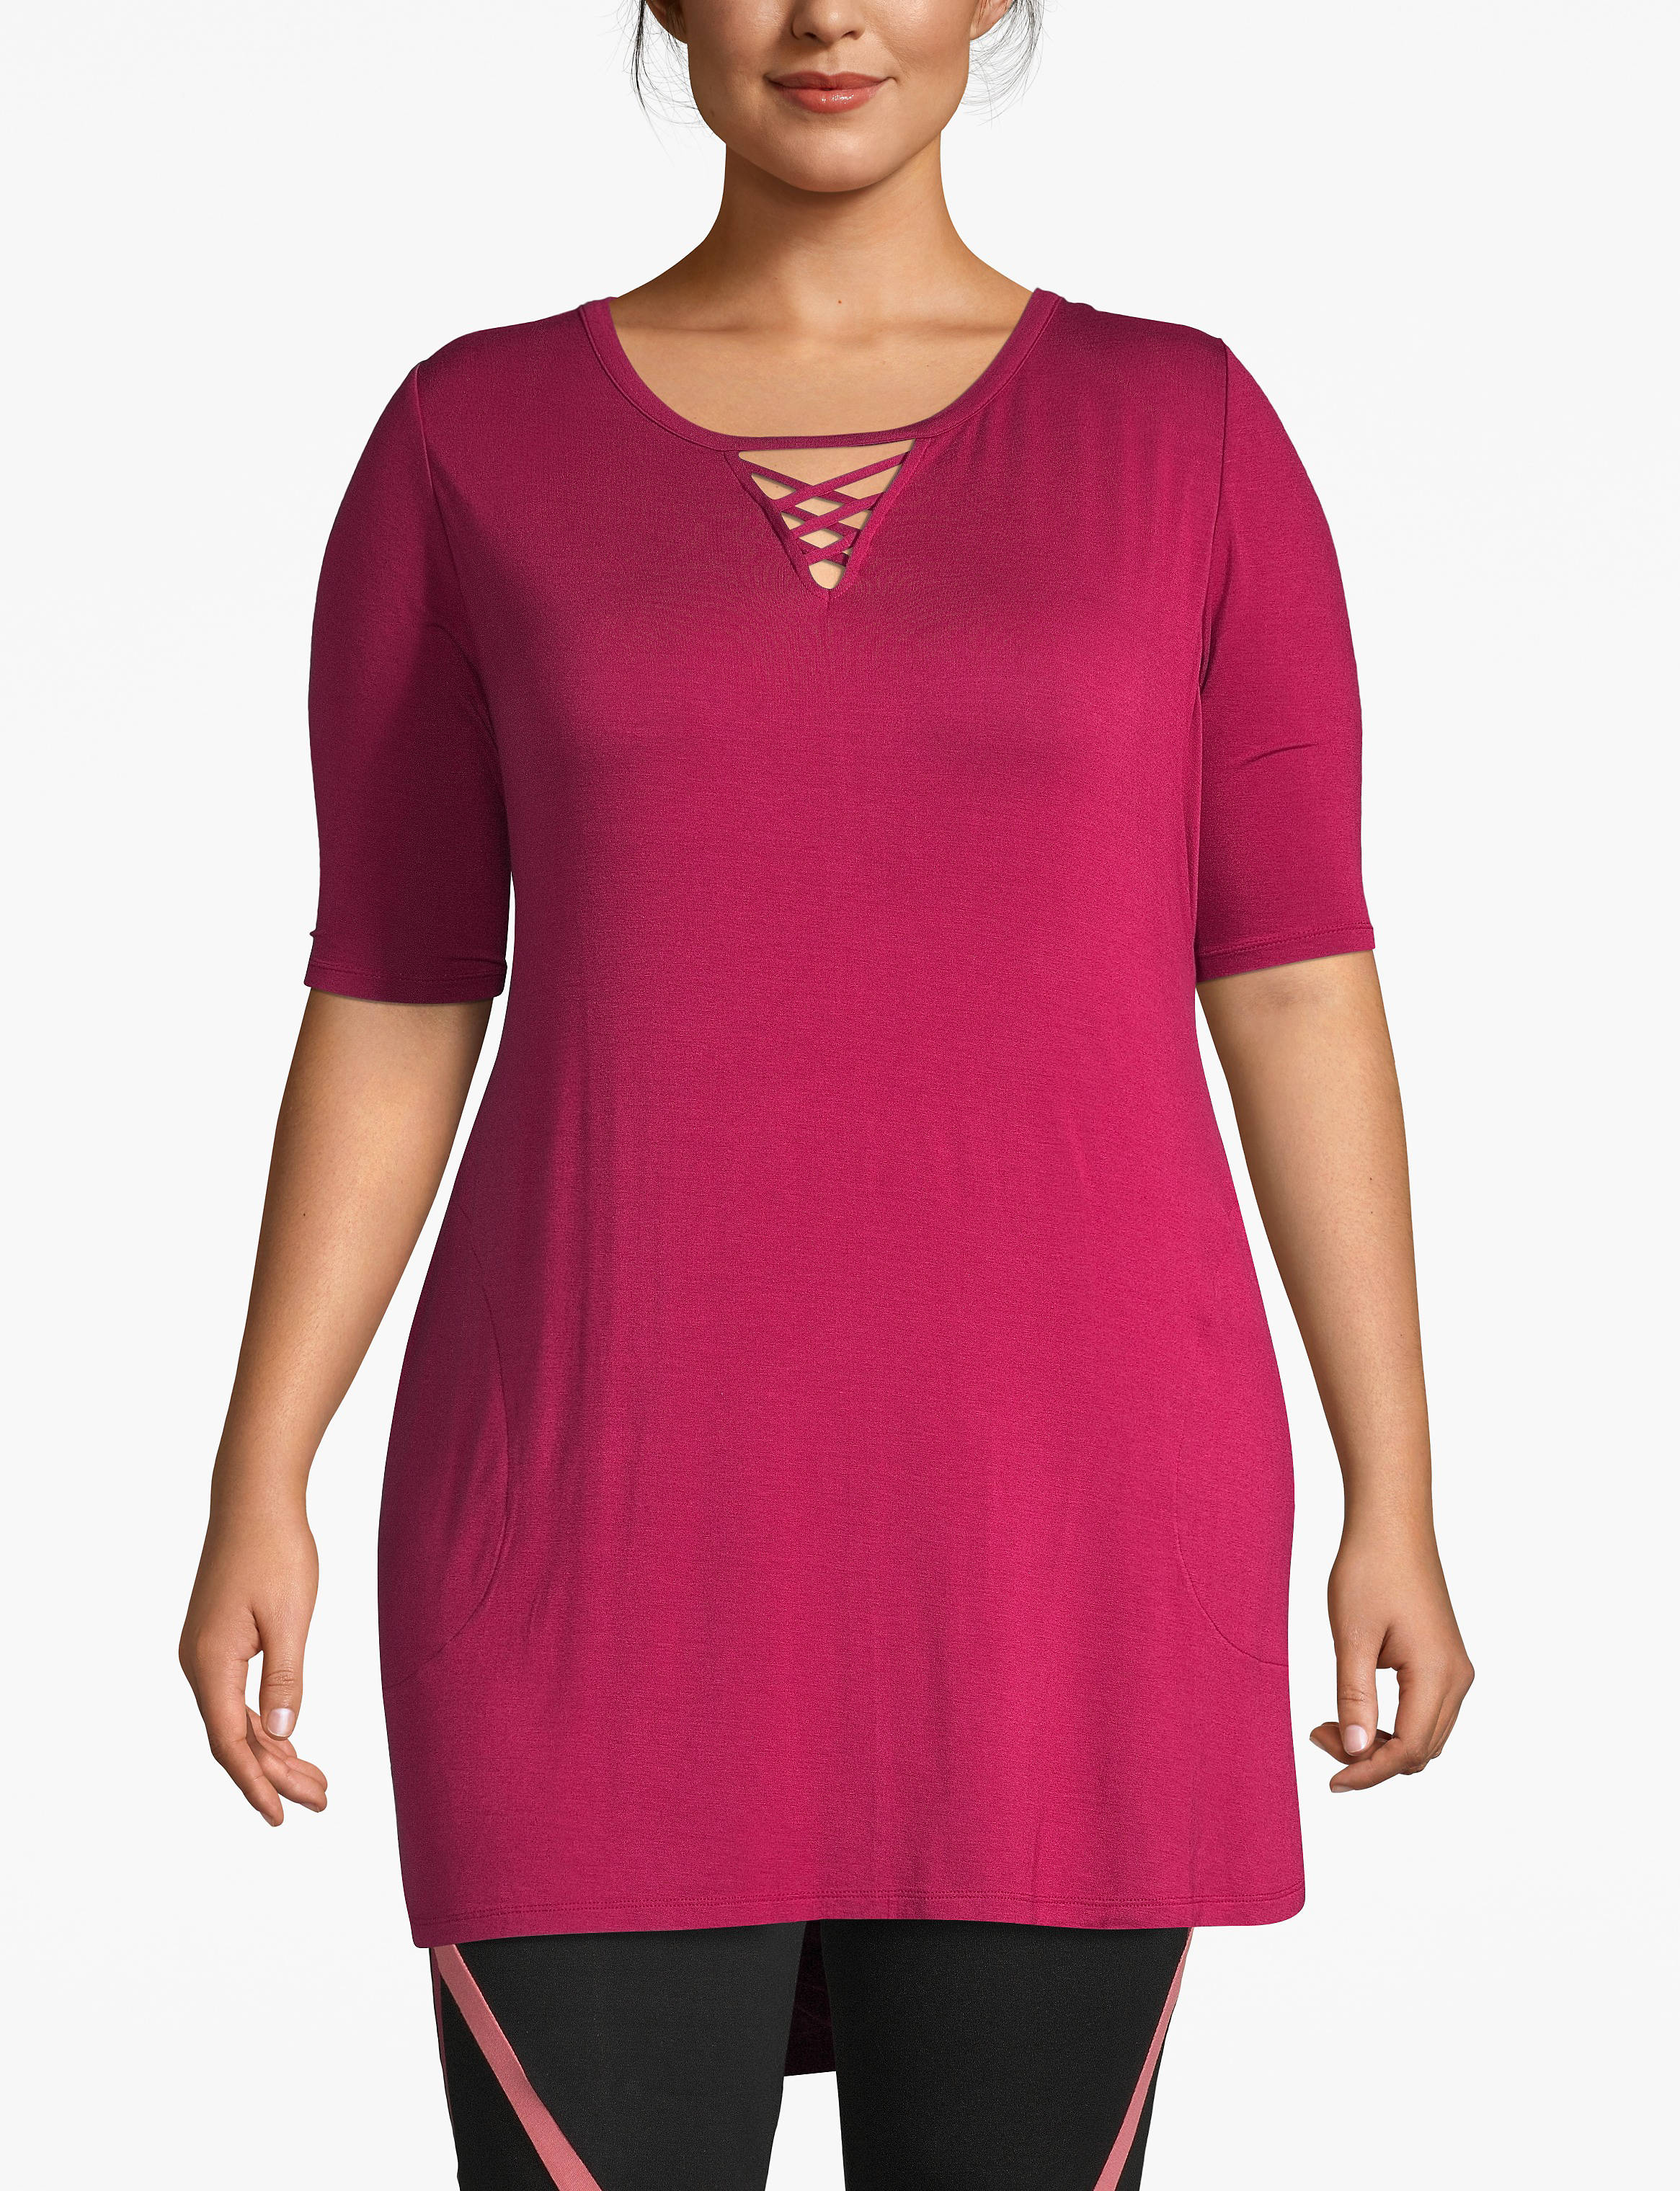 Livi Outlet Elbow Sleeve Scoop Neck Tunic F 1113993:PANTONE Beet Red:14/16 Product Image 1